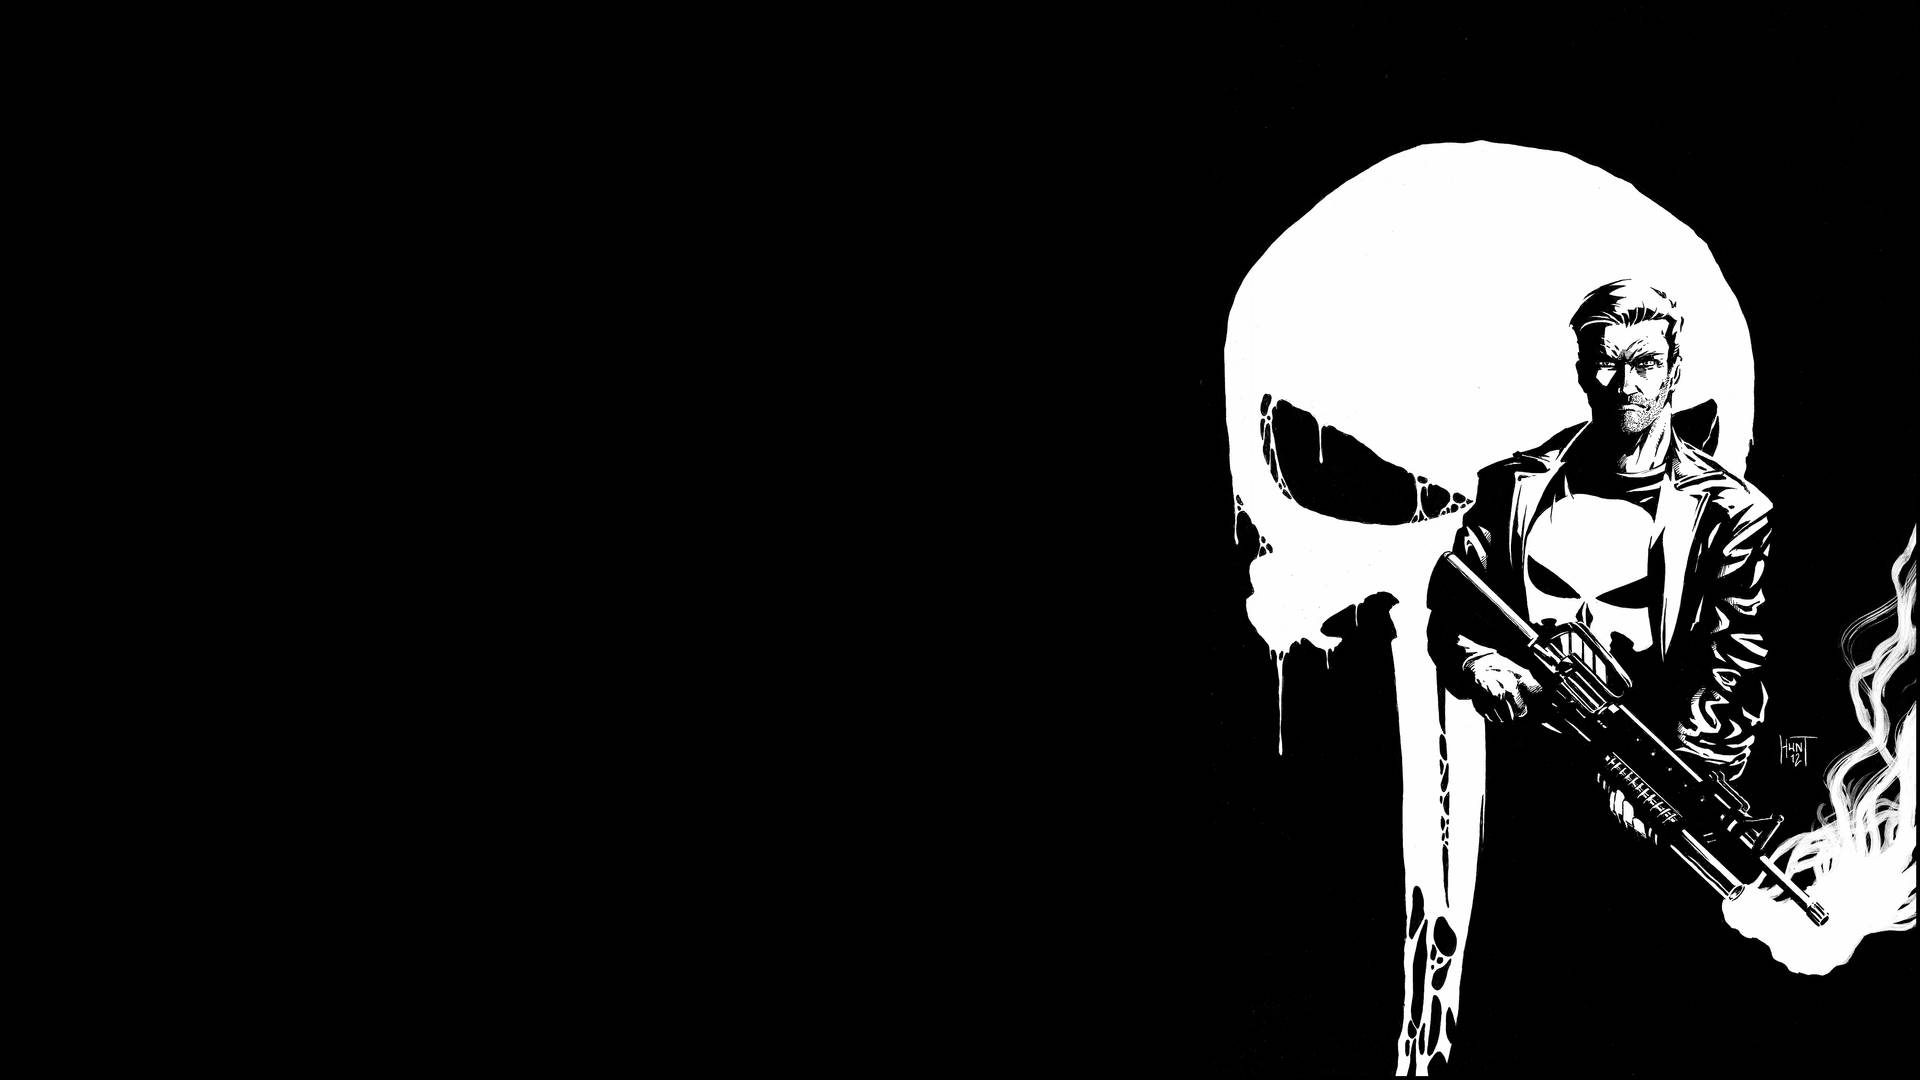 An Intense, Ruthless Punisher Logo In High Resolution, Showcasing The Iconic Skull In Menacing Detail